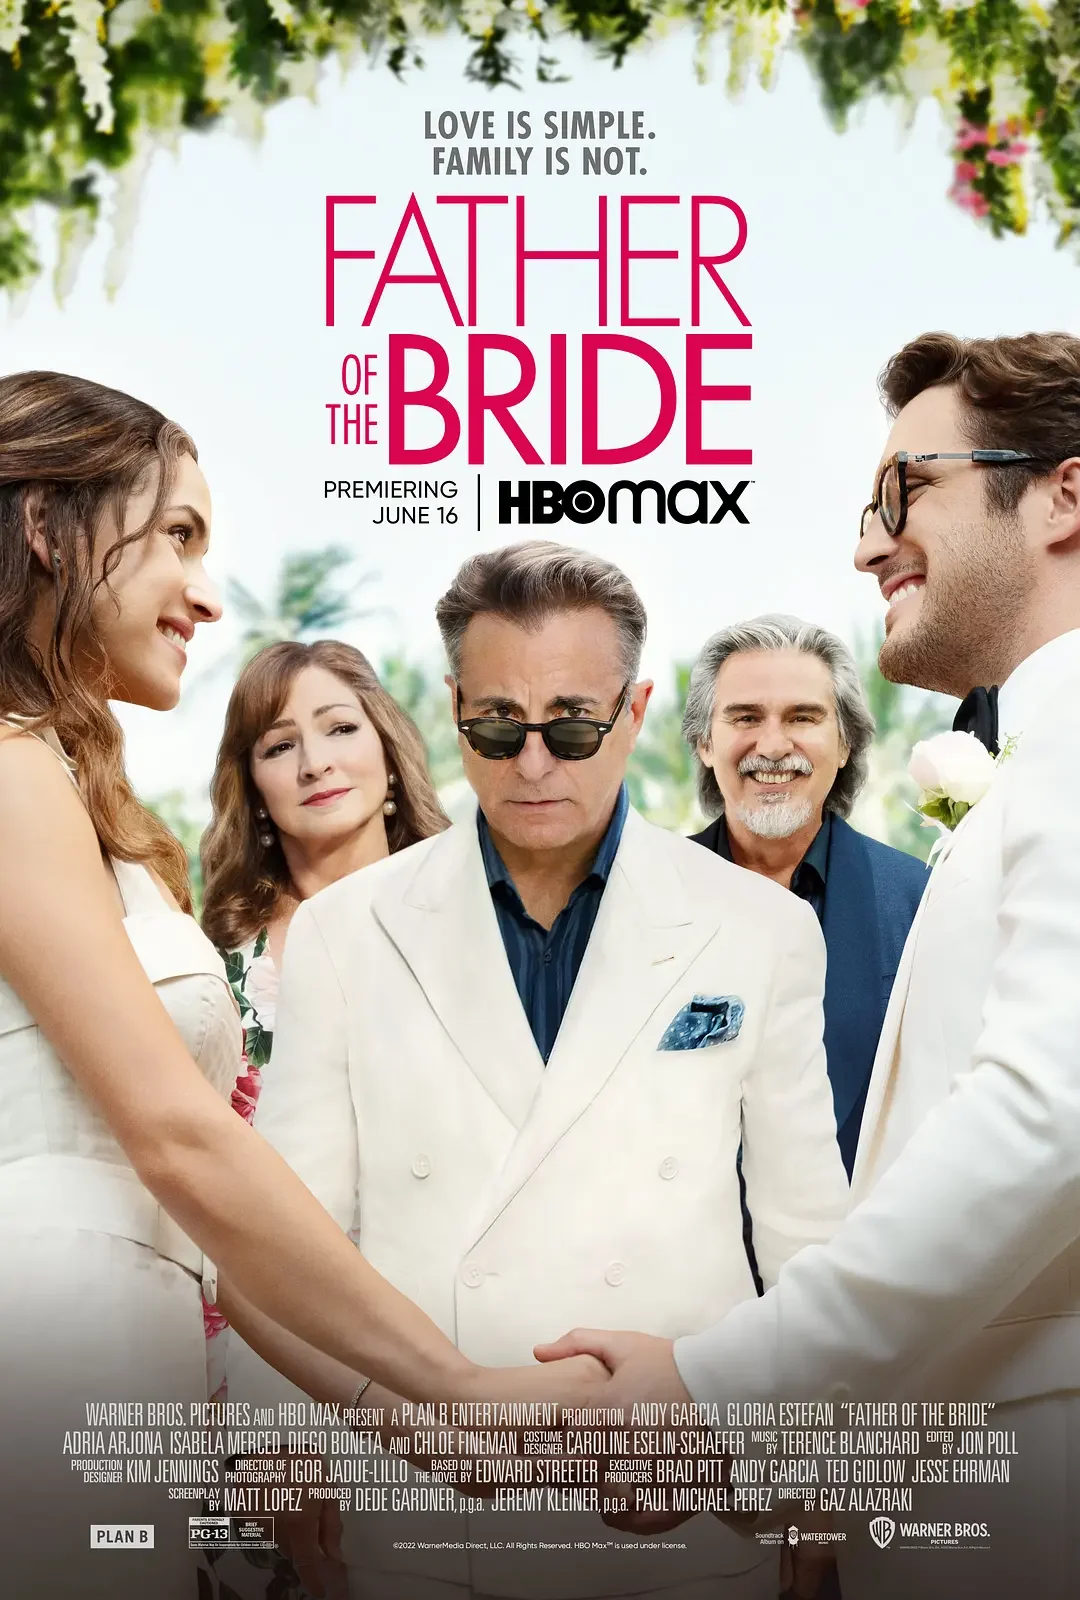 "Father of the Bride" launches Official Trailer, it will be online on June 16